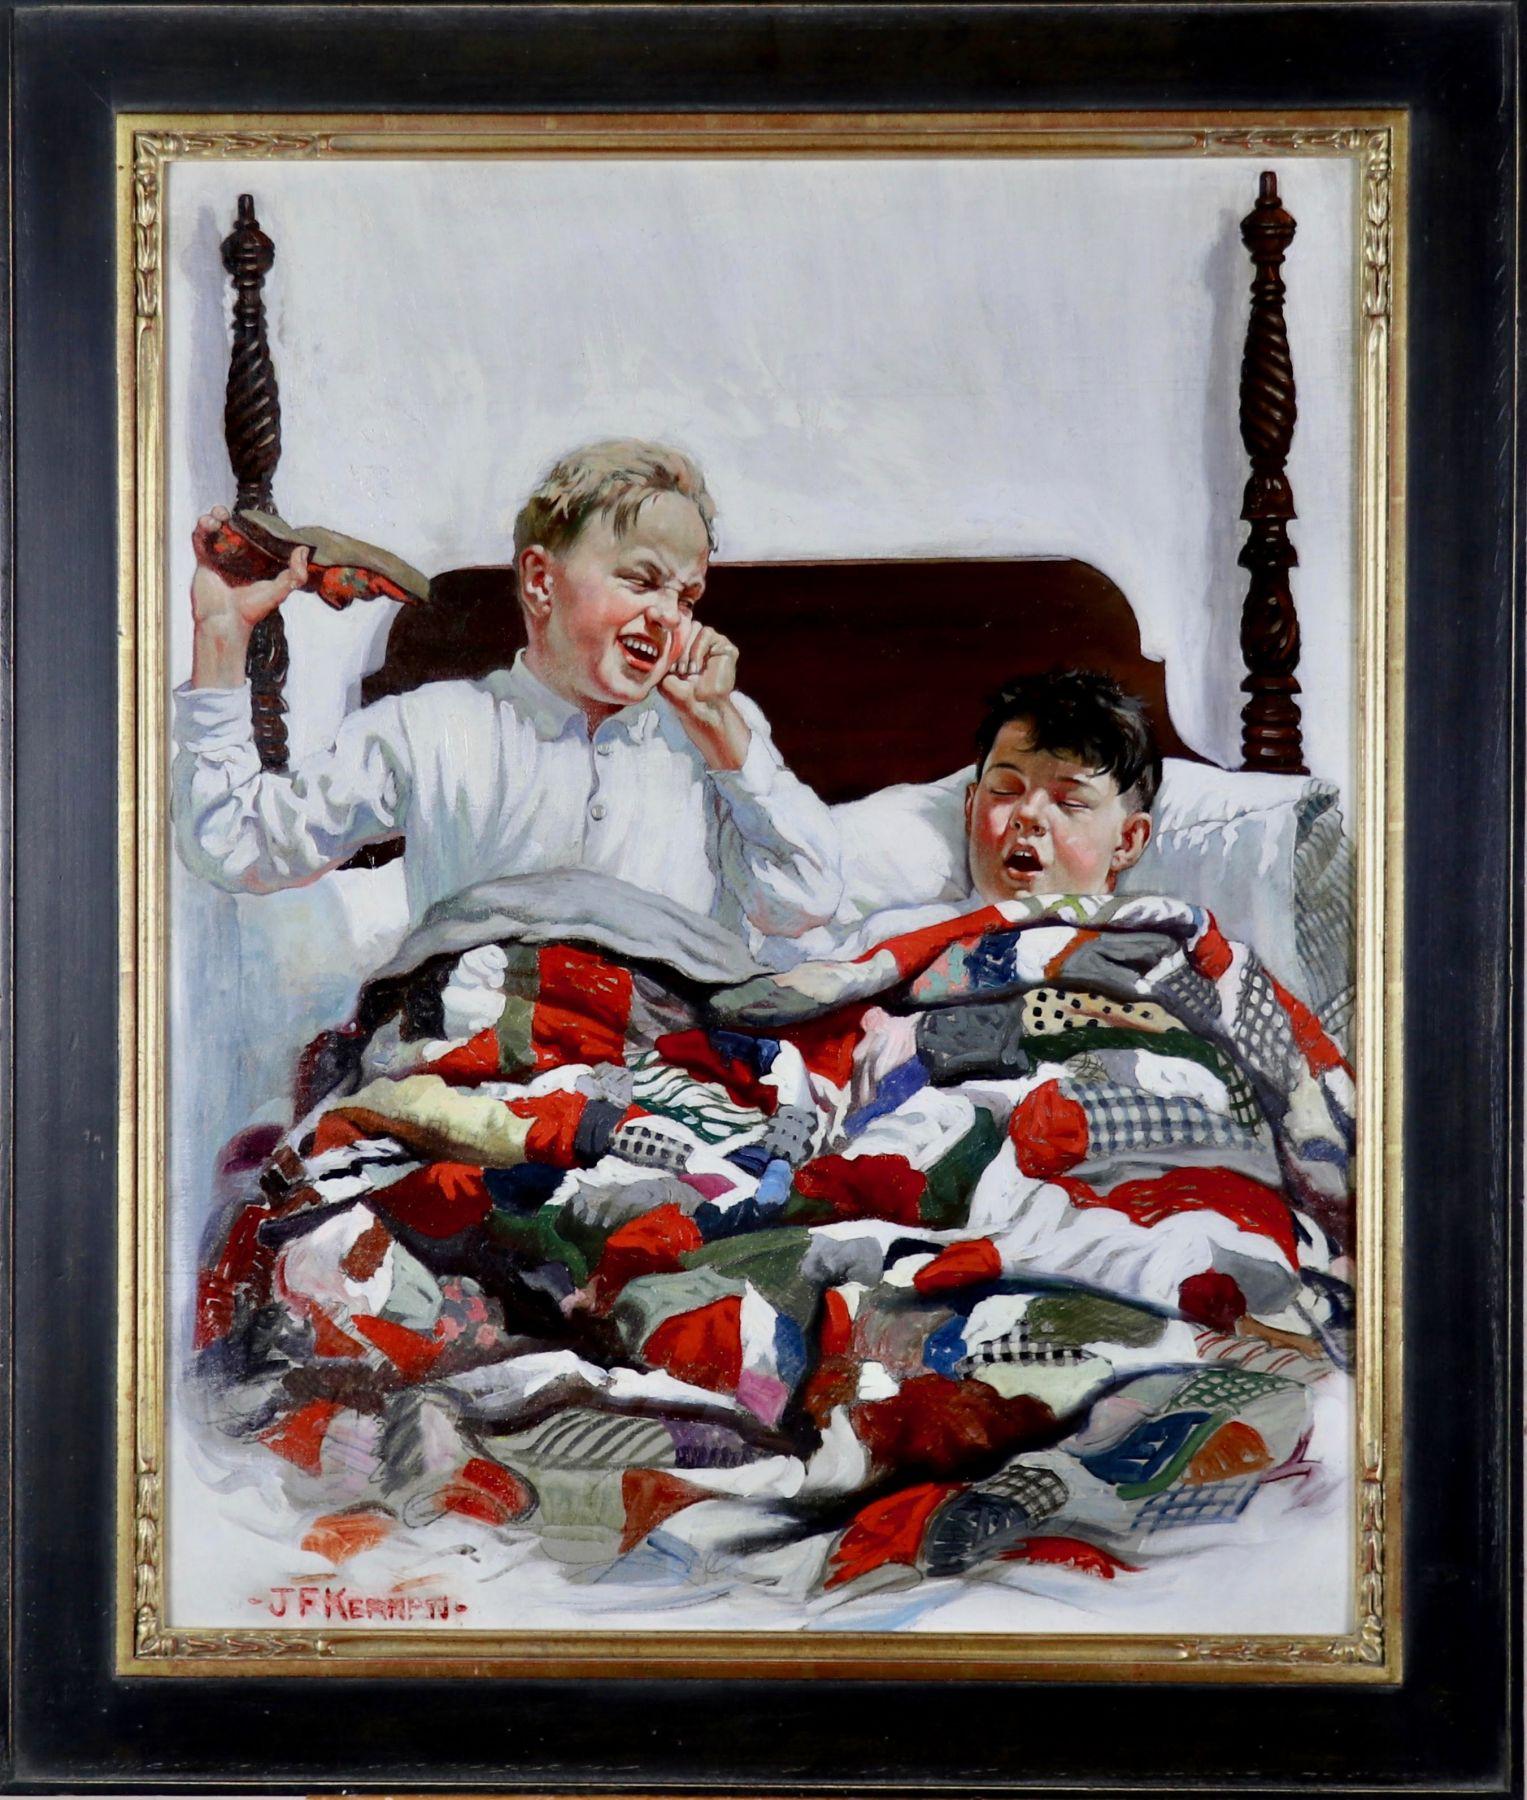 The Snoring Brother - Painting by Joseph Francis Kernan